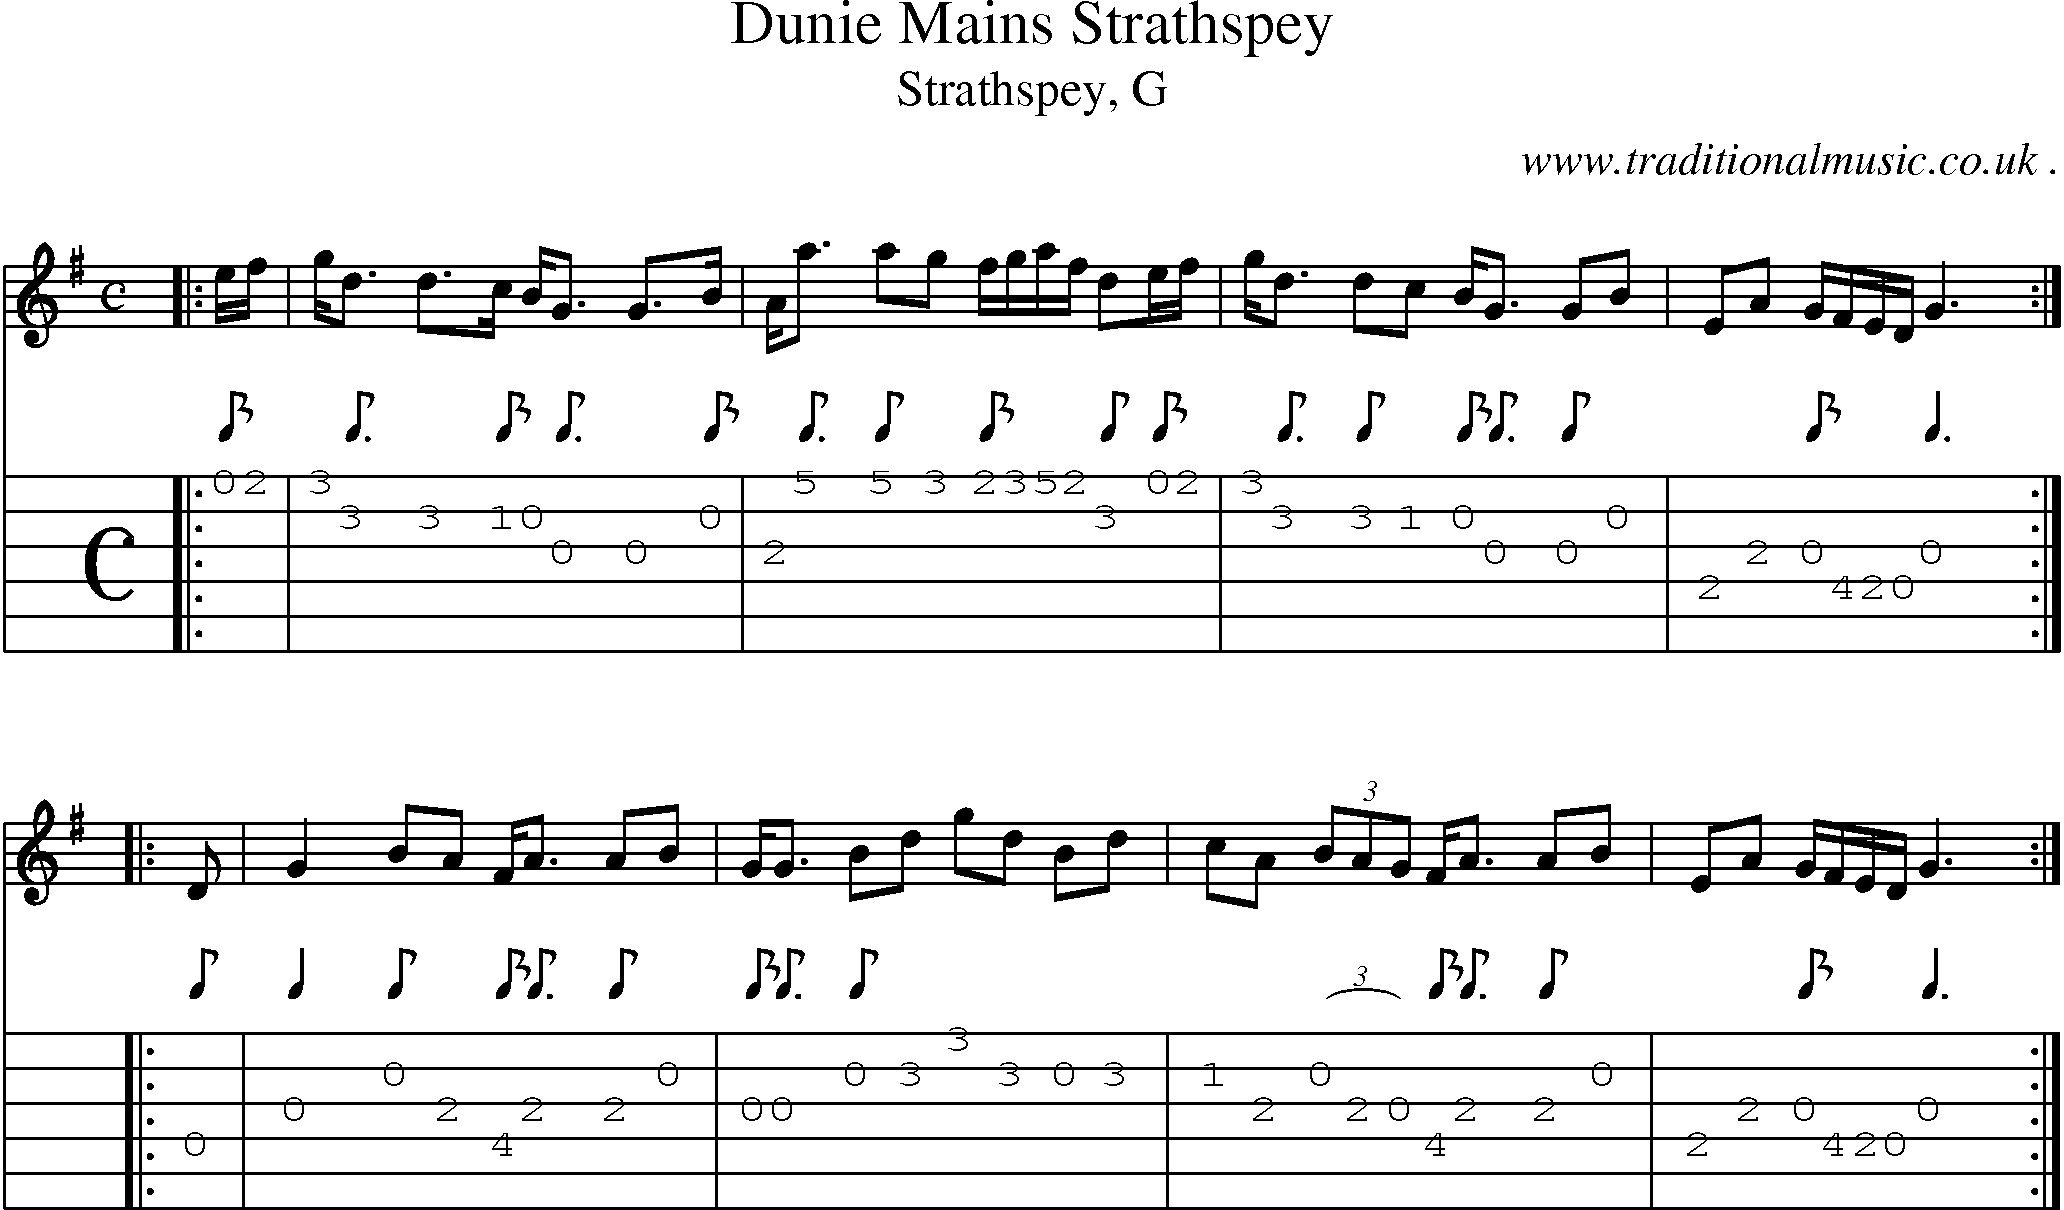 Sheet-music  score, Chords and Guitar Tabs for Dunie Mains Strathspey